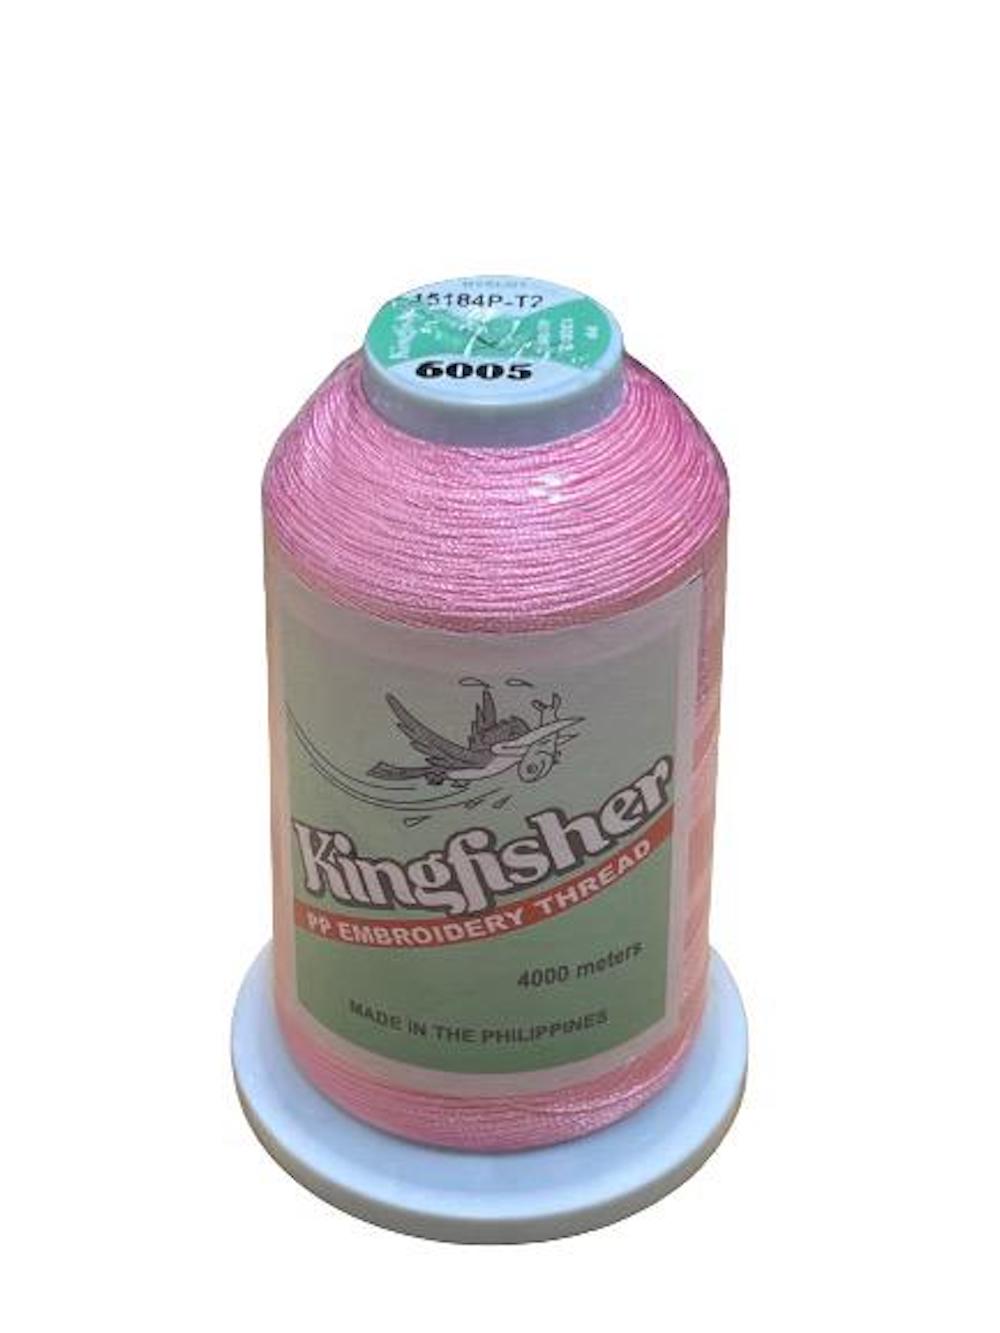 King Fisher Embroidery Thread 4000m 6005 - MY SEWING MALL